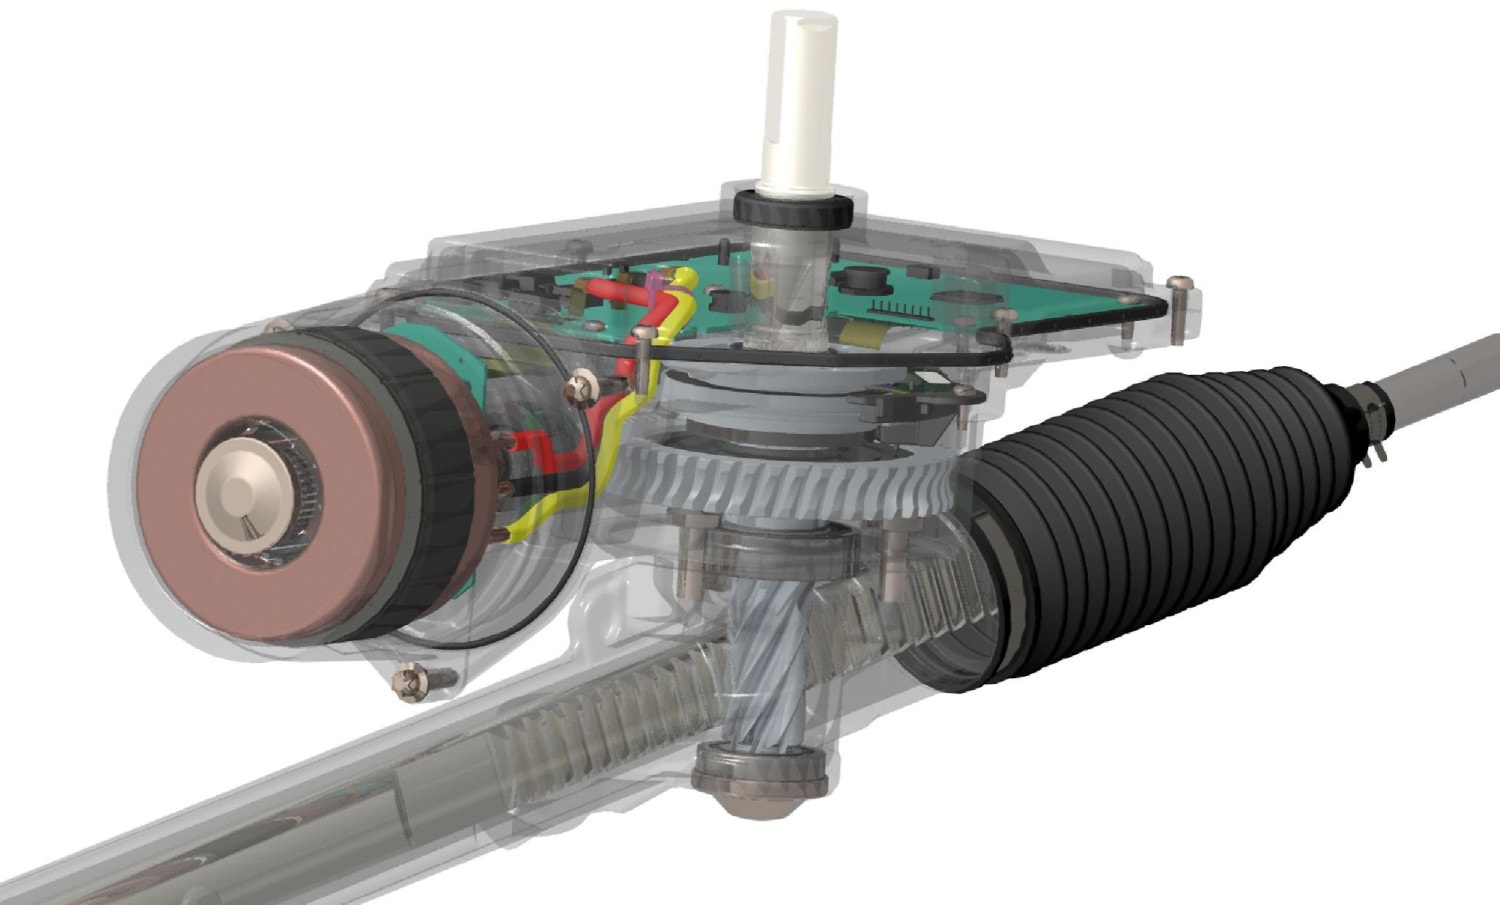 Nexteer Wins Contracts for Single Pinion Electric Power Steering